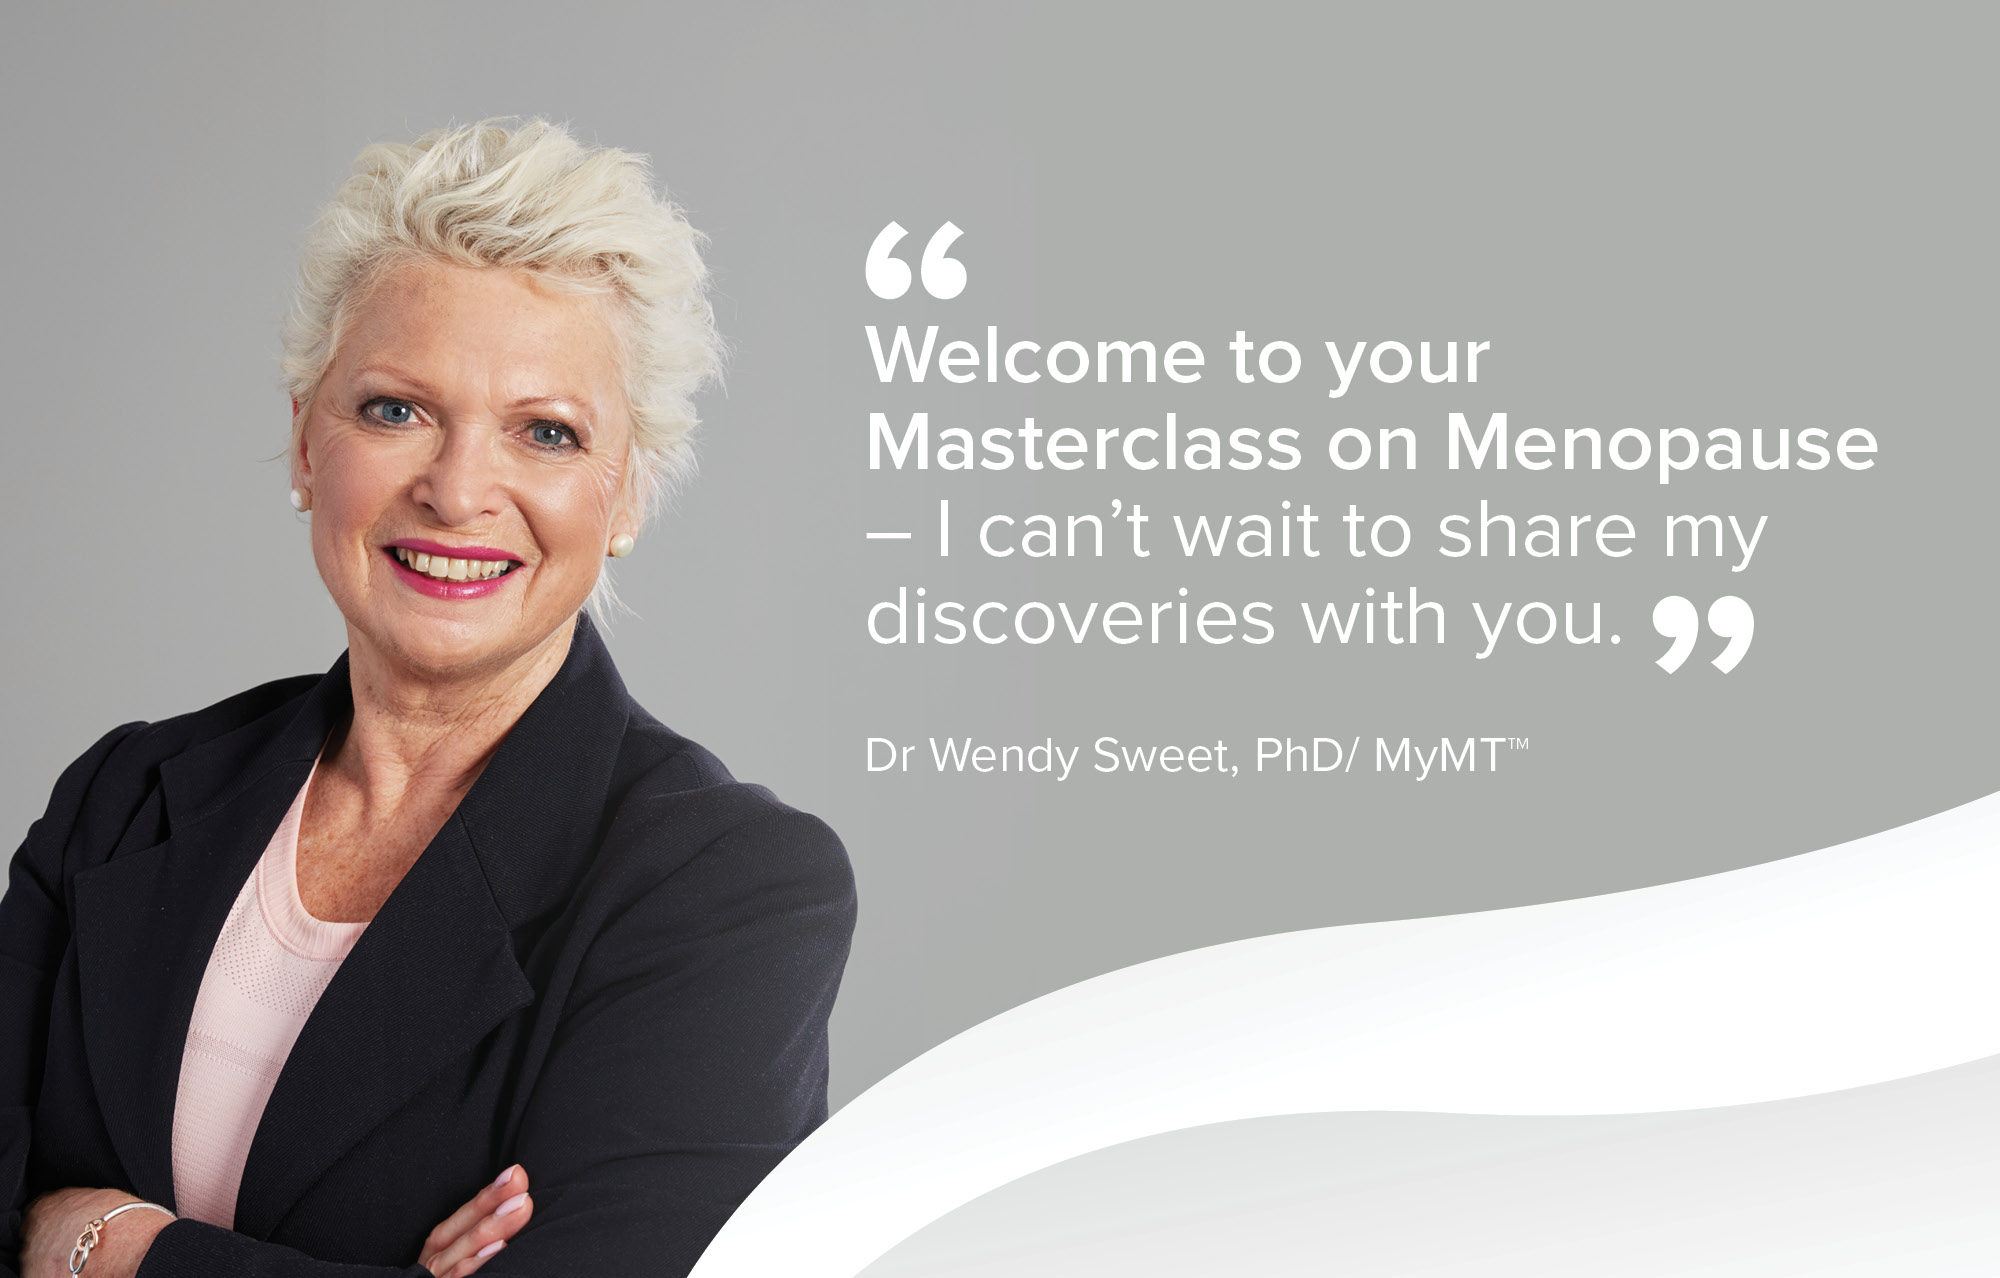 OXFORD – Your Masterclass in Menopause